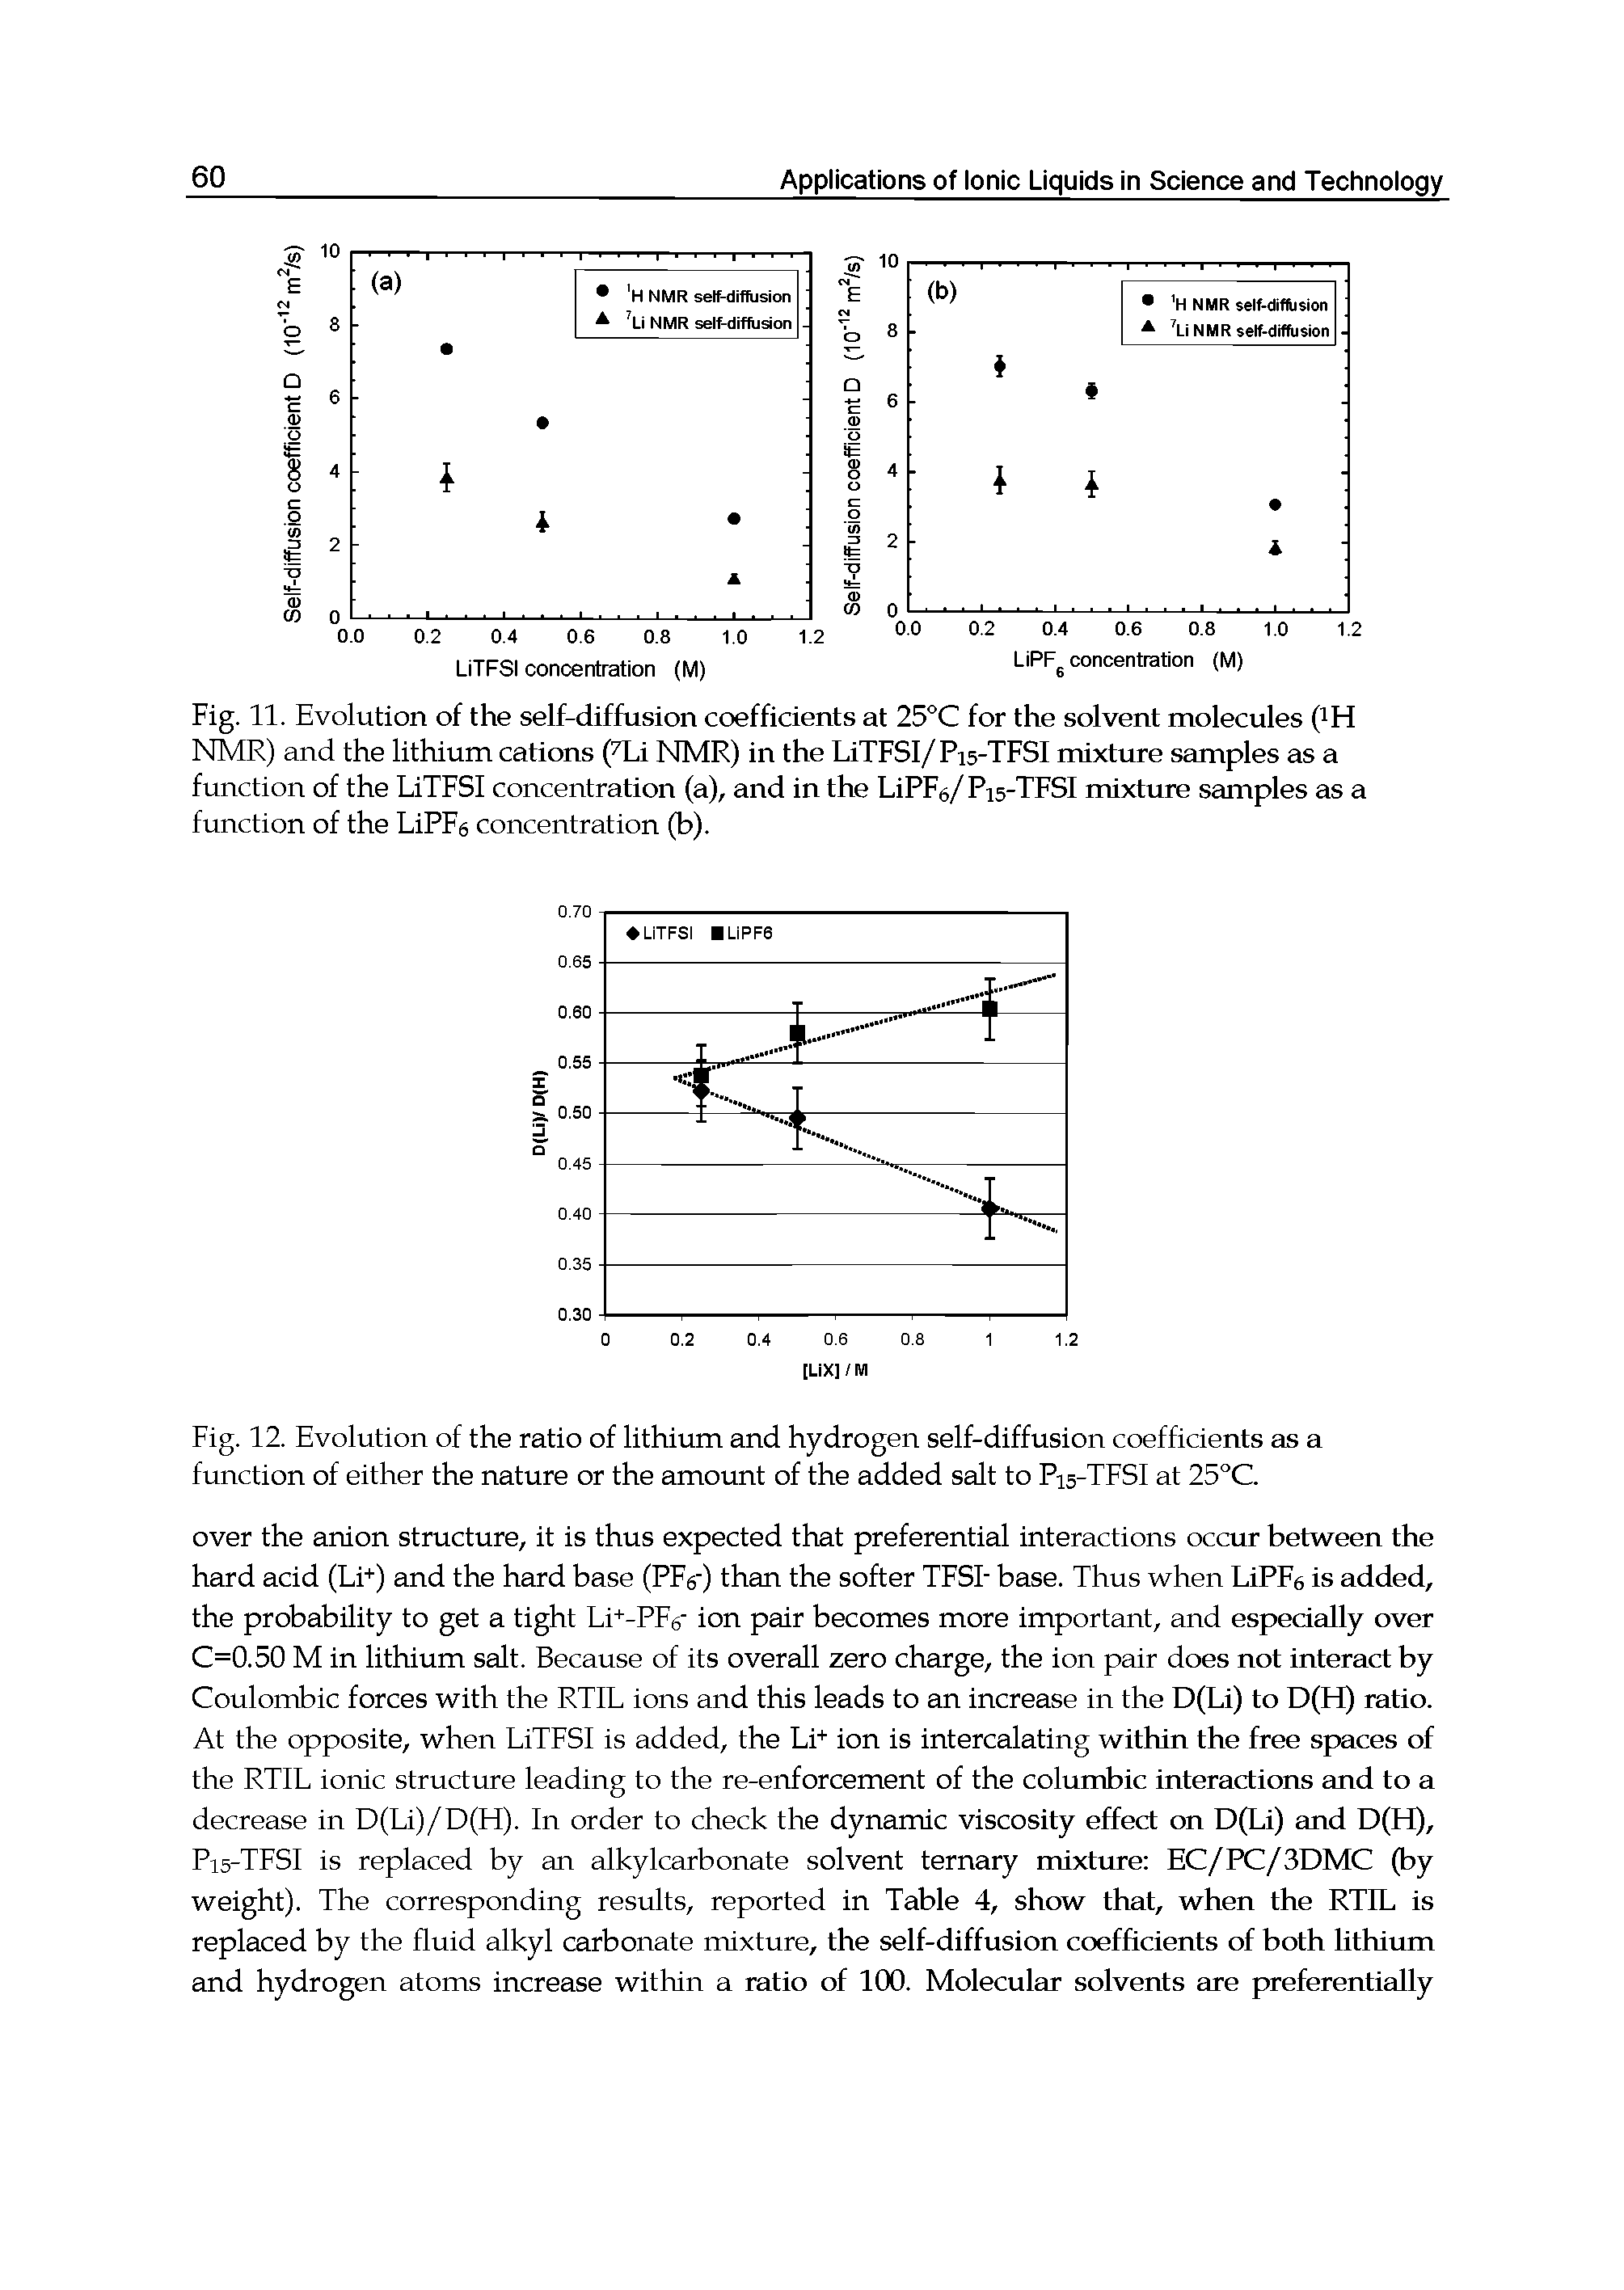 Fig. 12. Evolution of the ratio of lithium and hydrogen self-diffusion coefficients as a function of either the nature or the amount of the added salt to P15-TFSI at 25°C.